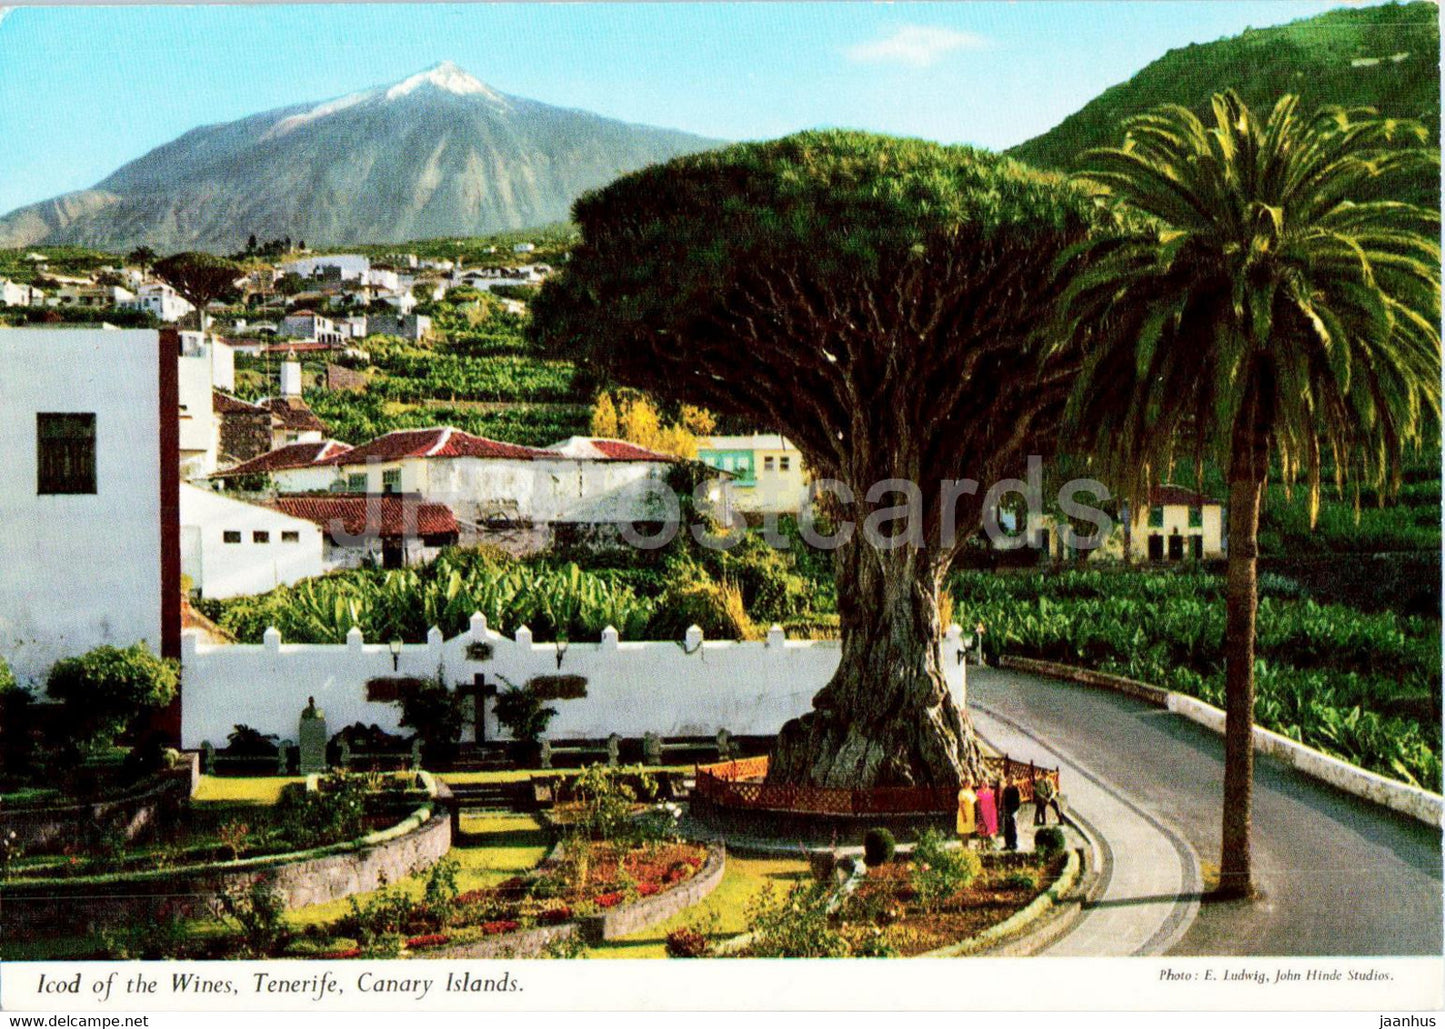 Icod of the Wines - Canary Islands - Tenerife - dragon tree - Spain - used - JH Postcards